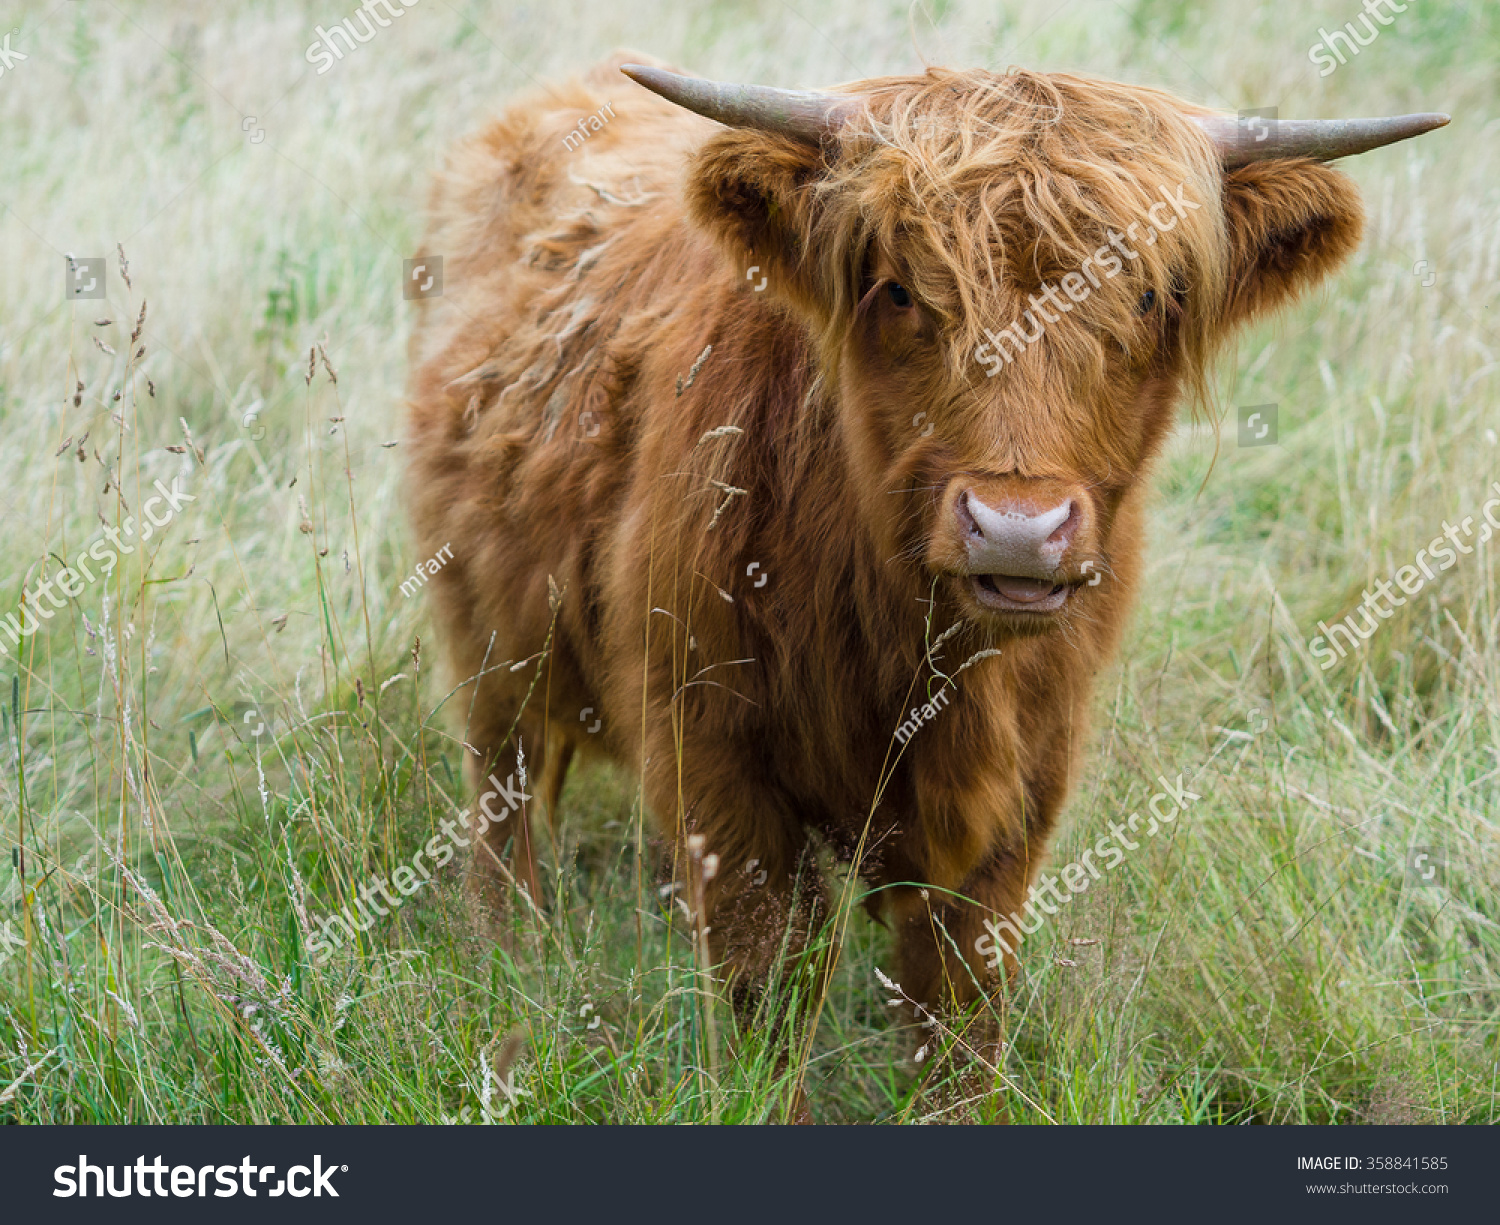 Young Highland Cow Horns Looking Cute Stock Photo 358841585 | Shutterstock